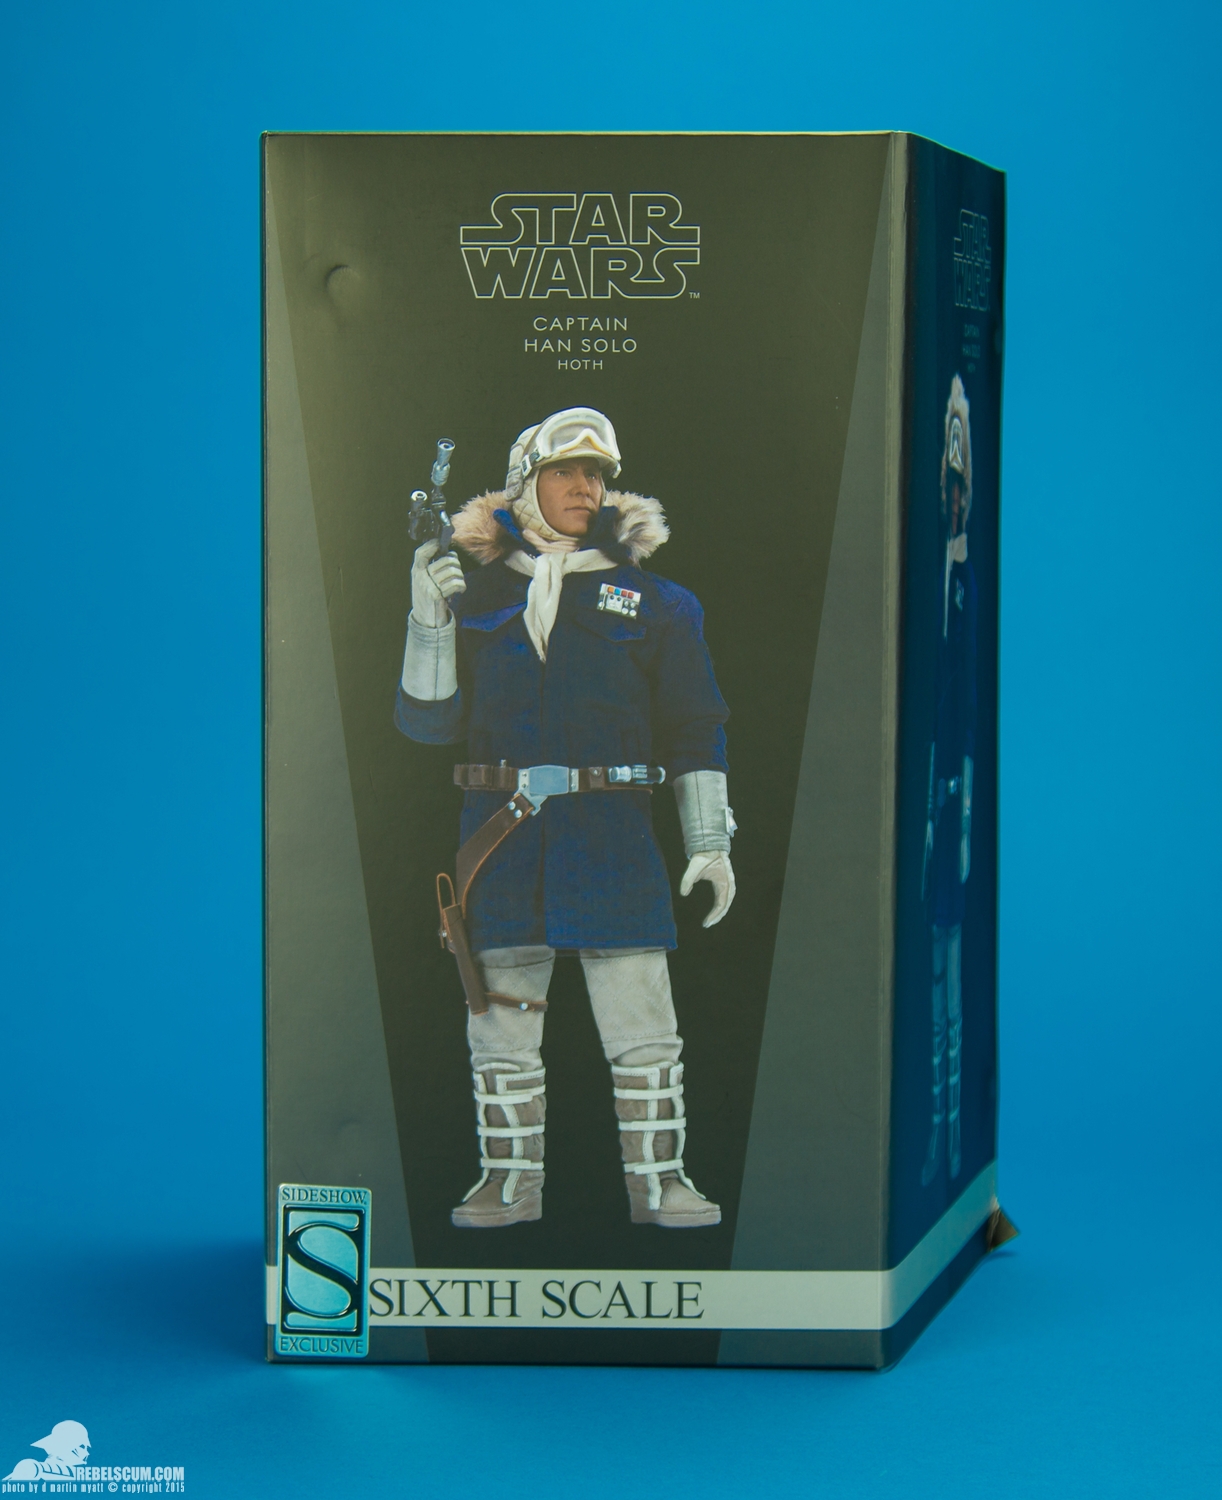 Han-Solo-Hoth-Blue-Sixth-Scale-Sideshow-Collectibles-Star-Wars-026.jpg